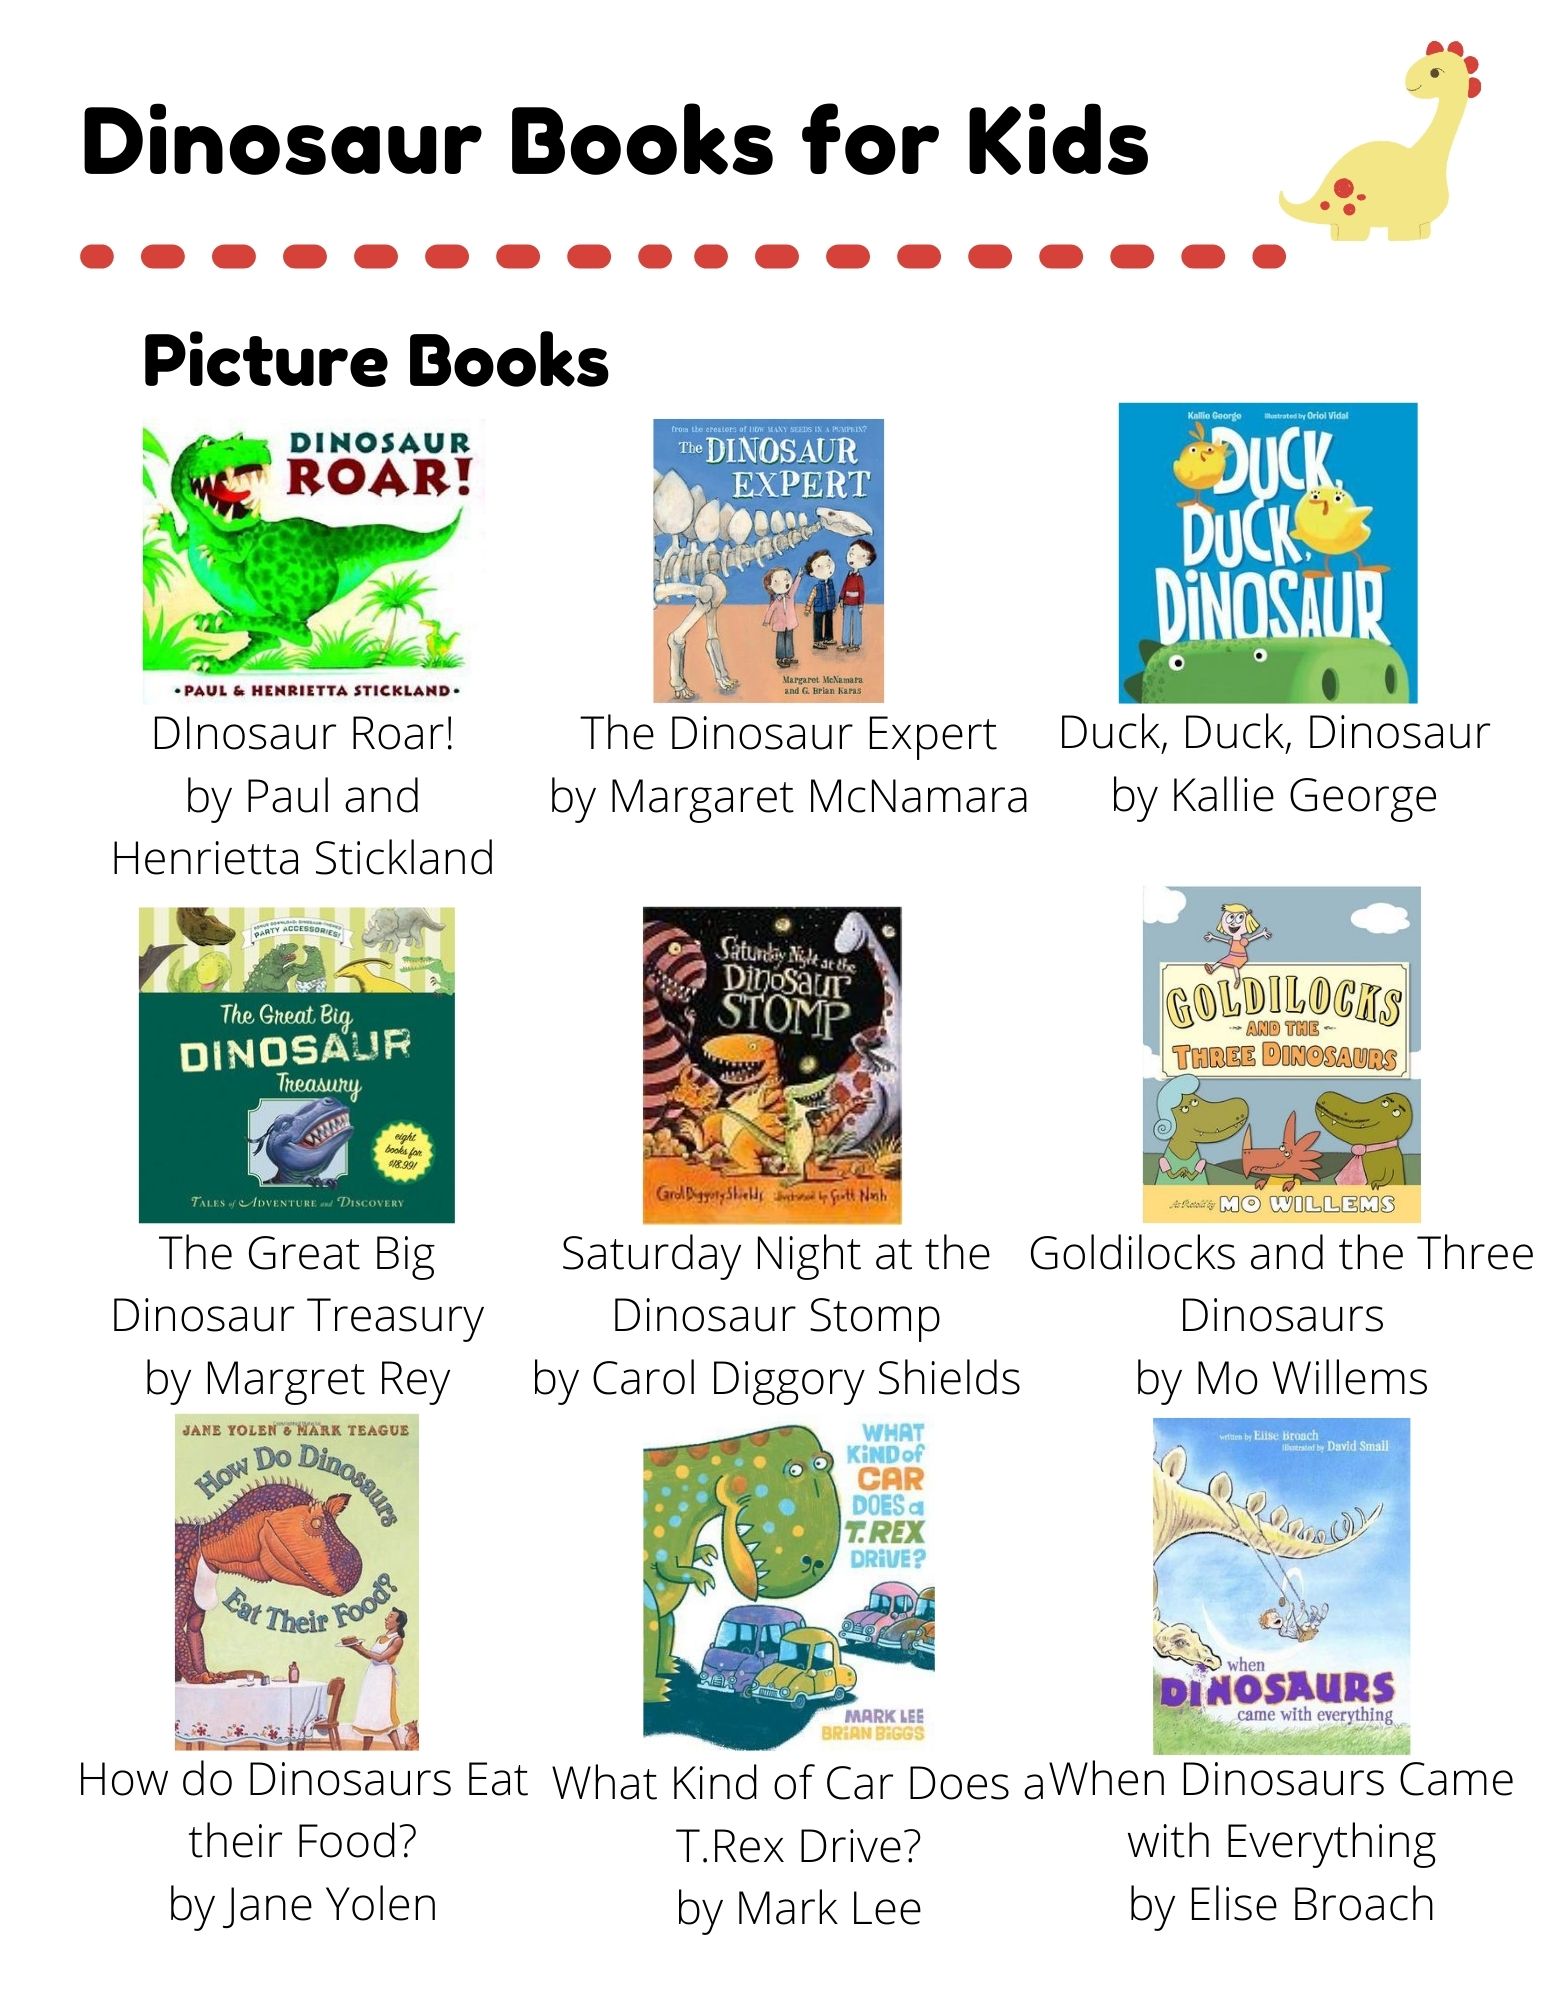 Dinosaurs: Picture Books: DInosaur Roar! by Paul and Henrietta Stickland. The Dinosaur Expert by Margaret McNamara. Duck, Duck, Dinosaur by Kallie George. The Great Big Dinosaur Treasury by Margret Rey. Saturday Night at the Dinosaur Stomp by Carol Diggory Shields. Goldilocks and the Three Dinosaurs by Mo Willems. How do Dinosaurs Eat their Food? by Jane Yolen. What Kind of Car Does a T.Rex Drive? by Mark Lee. When Dinosaurs Came with Everything by Elise Broach. Easy Readers: Dinosaur Dig by Erin Soderberg Downing. Dinosaur Planet by David Orme. Digger the Dinosaur by Rebecca Kai Dotlich. Max Spaniel: Dinosaur Hunt by David Catrow. Danny and the Dinosaur by Syd Hoff. Bones and the Dinosaur Mystery by David A. Adler. Chapter Books: Don't Wake the DInosaur by Geronimo Stilton. Arlo, Mrs. Ogg, and the Dinosaur Zoo by Alice Hemming. Dinosaurs Before Dark by Mary Pope Osborne.